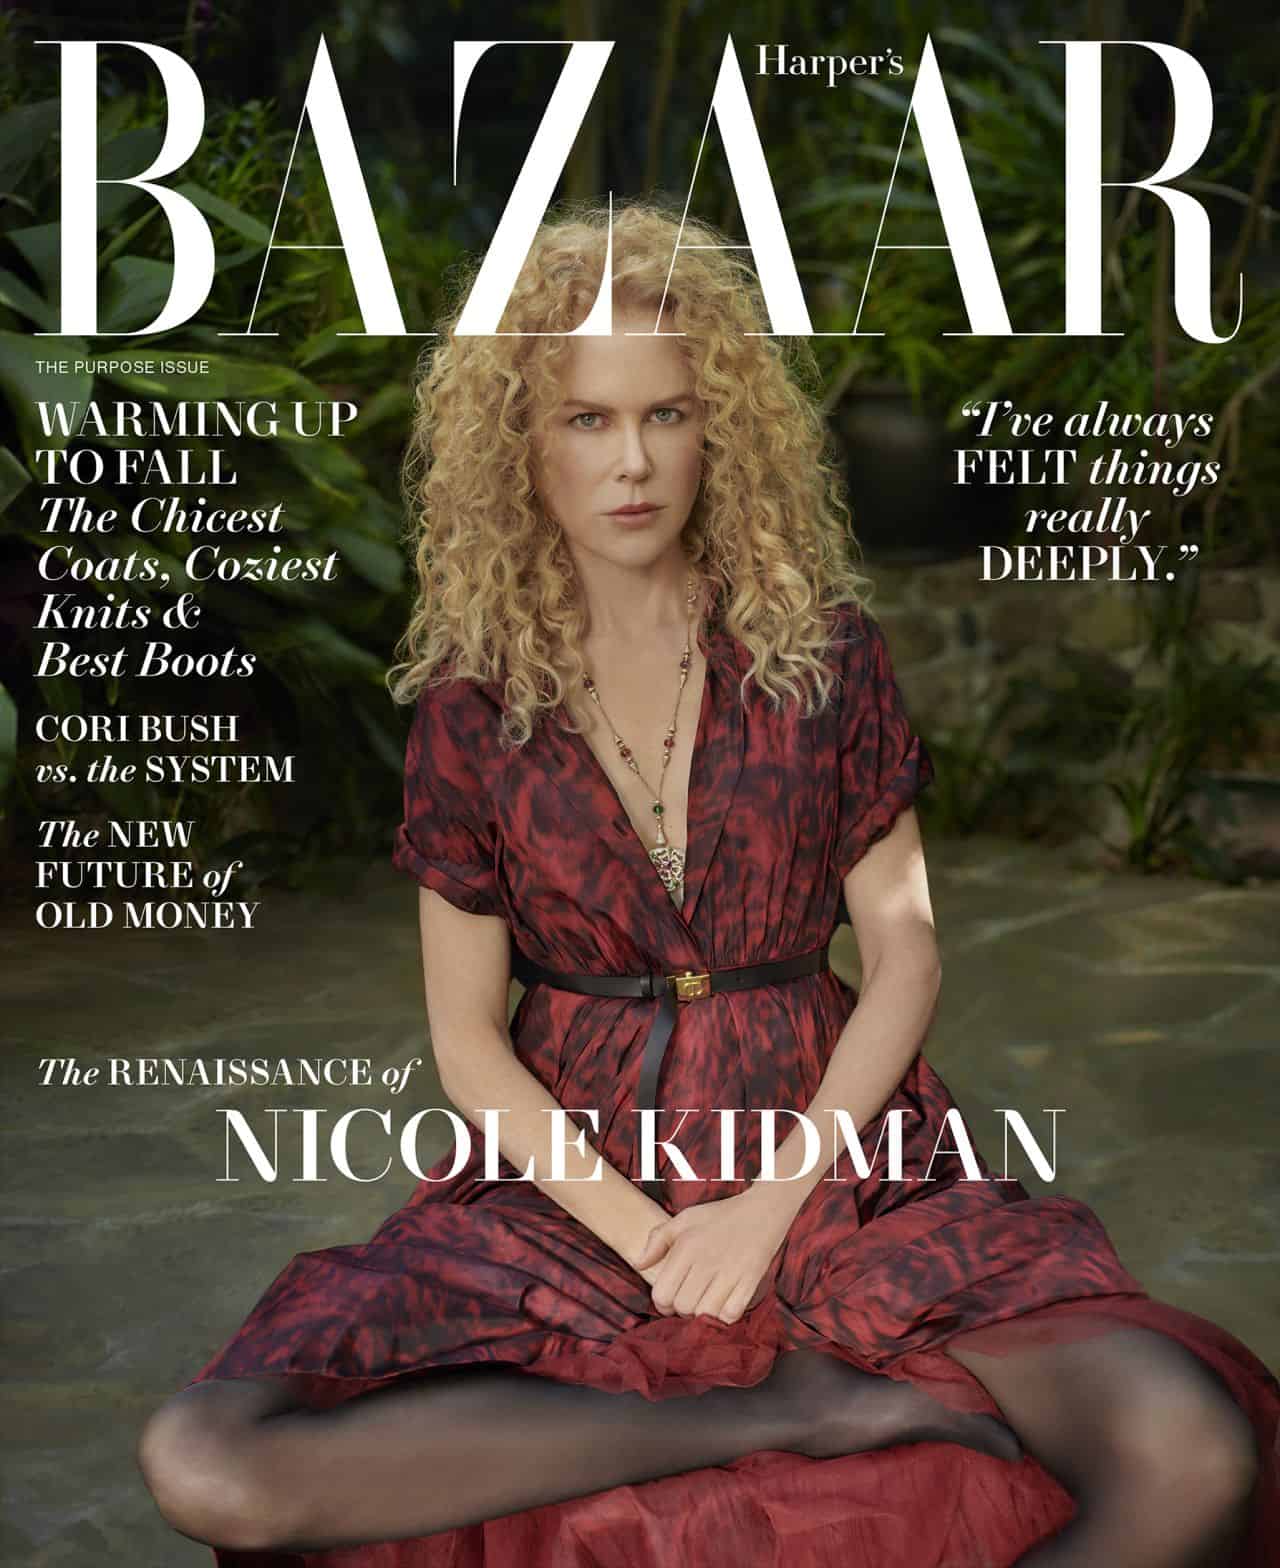 Nicole Kidman is the Cover Star of Harper’s Bazaar’s “The Purpose Issue”